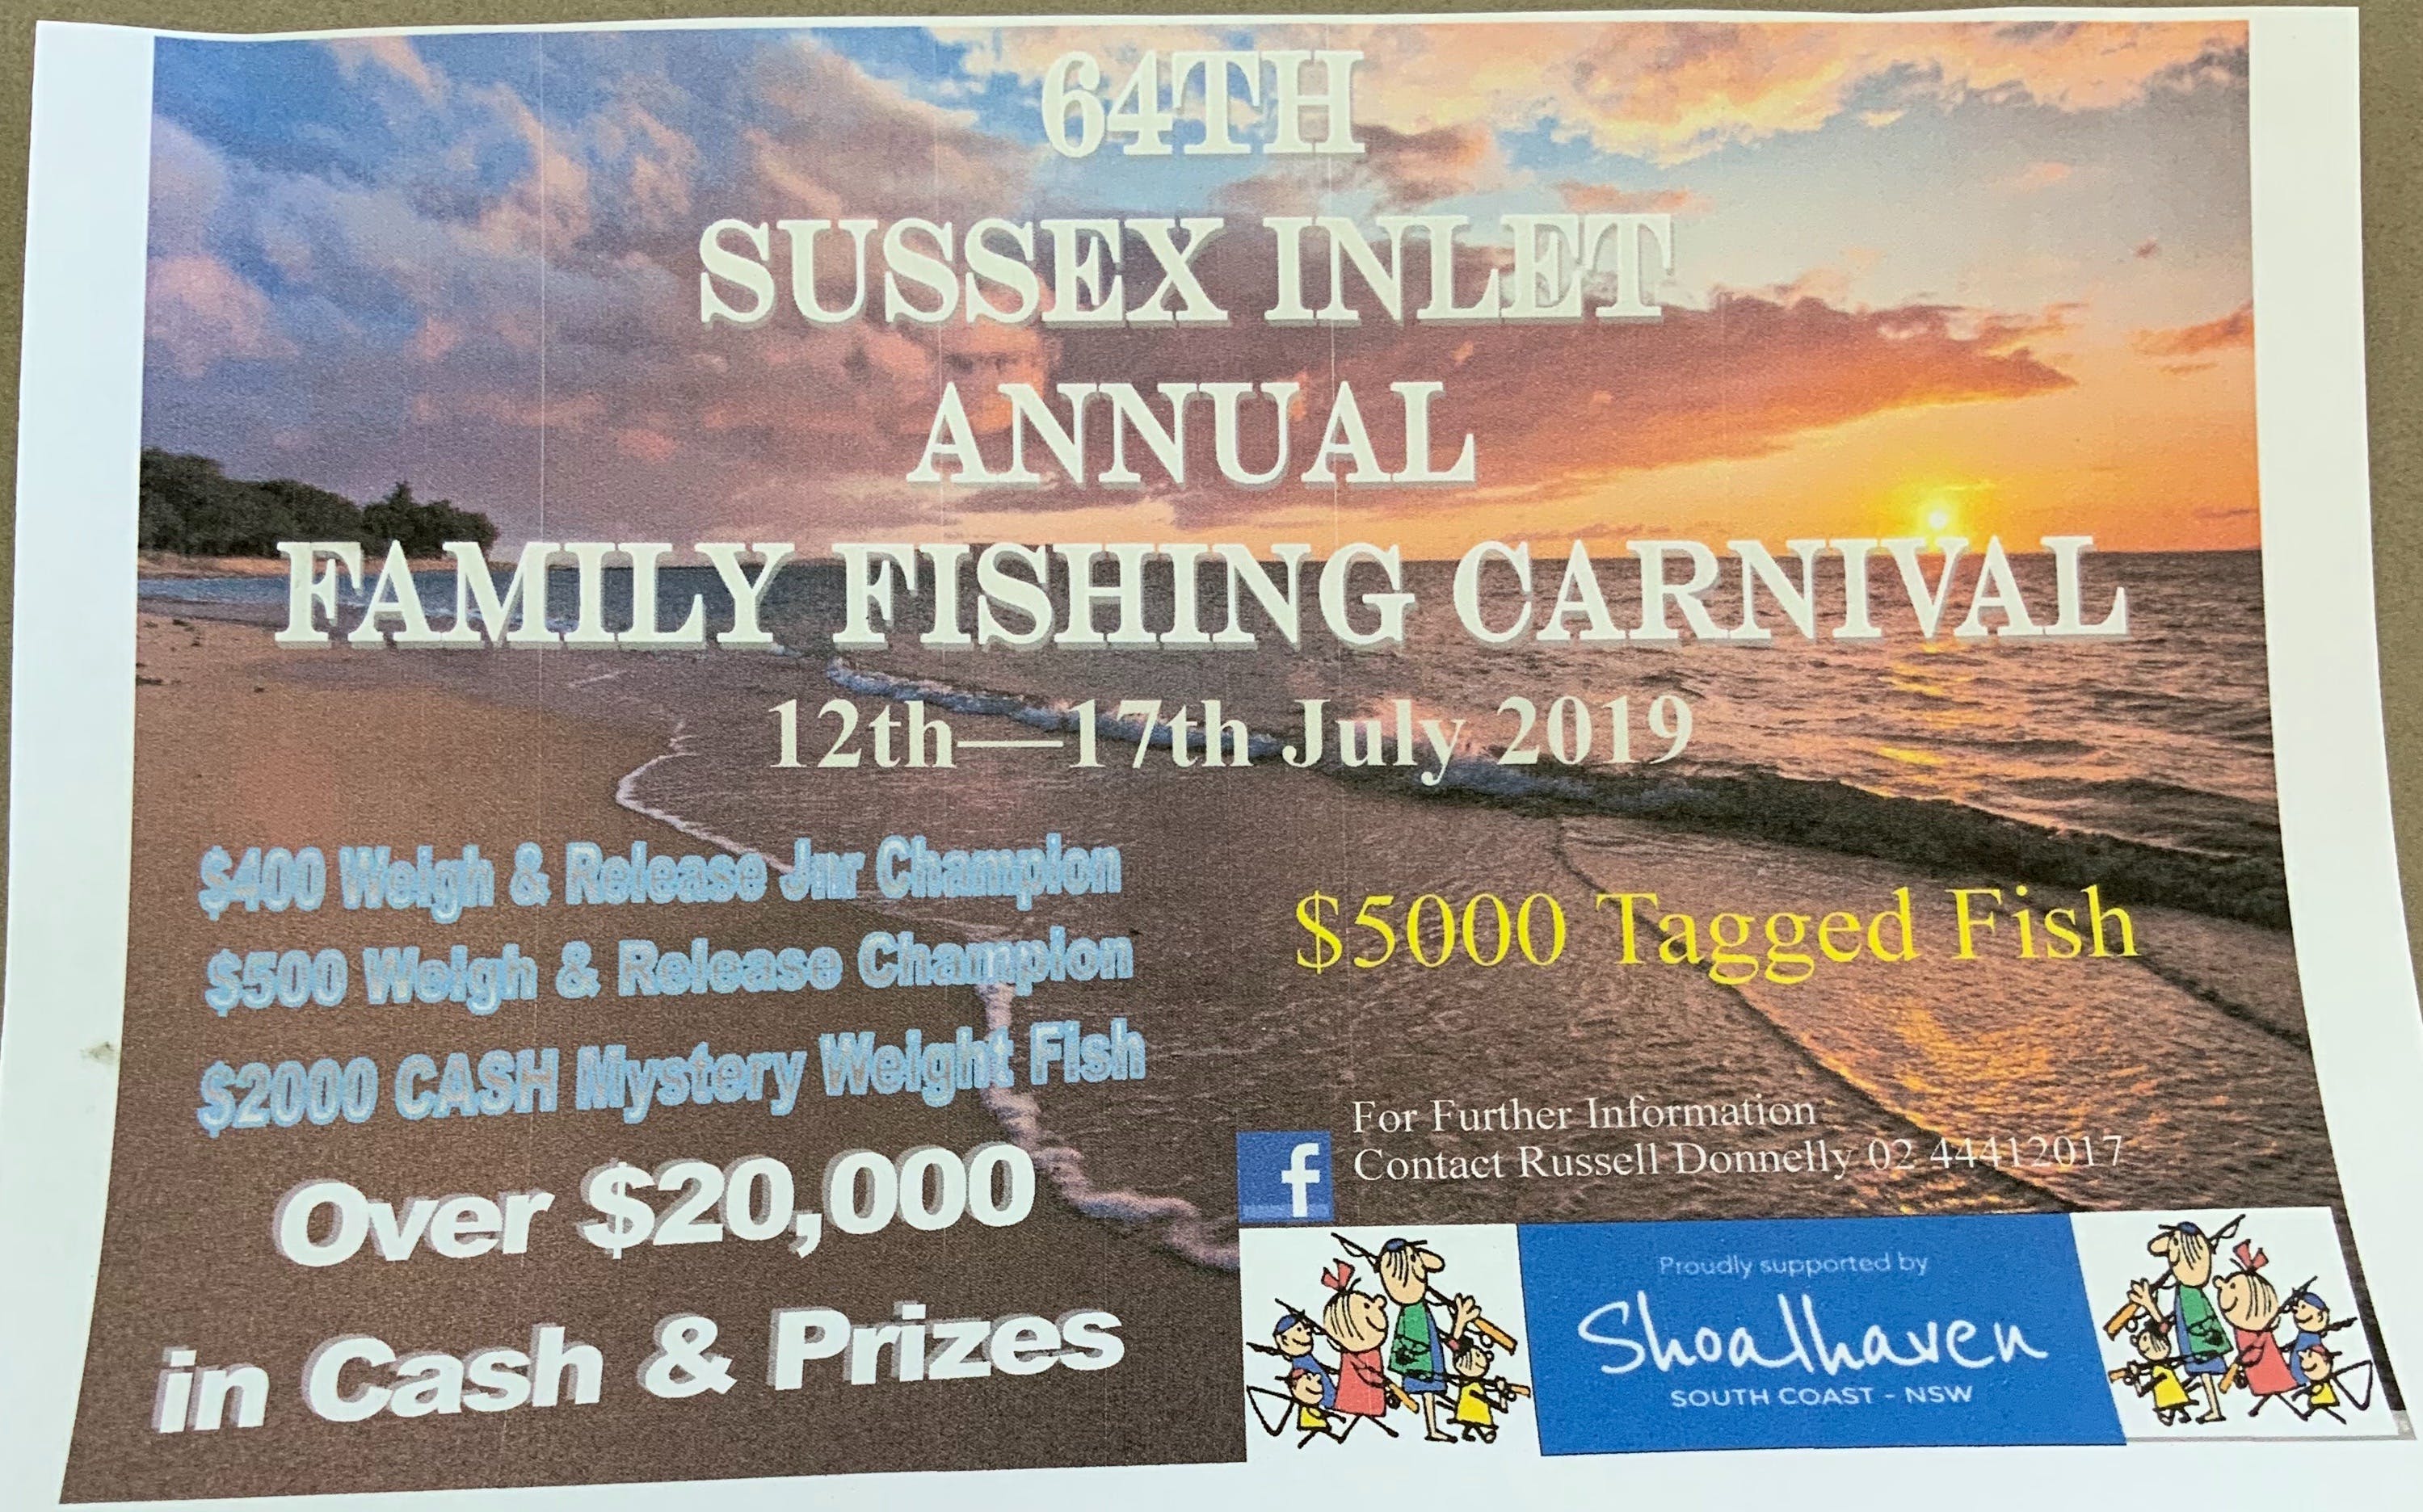 The Sussex Inlet Annual Family Fishing Carnival - eAccommodation